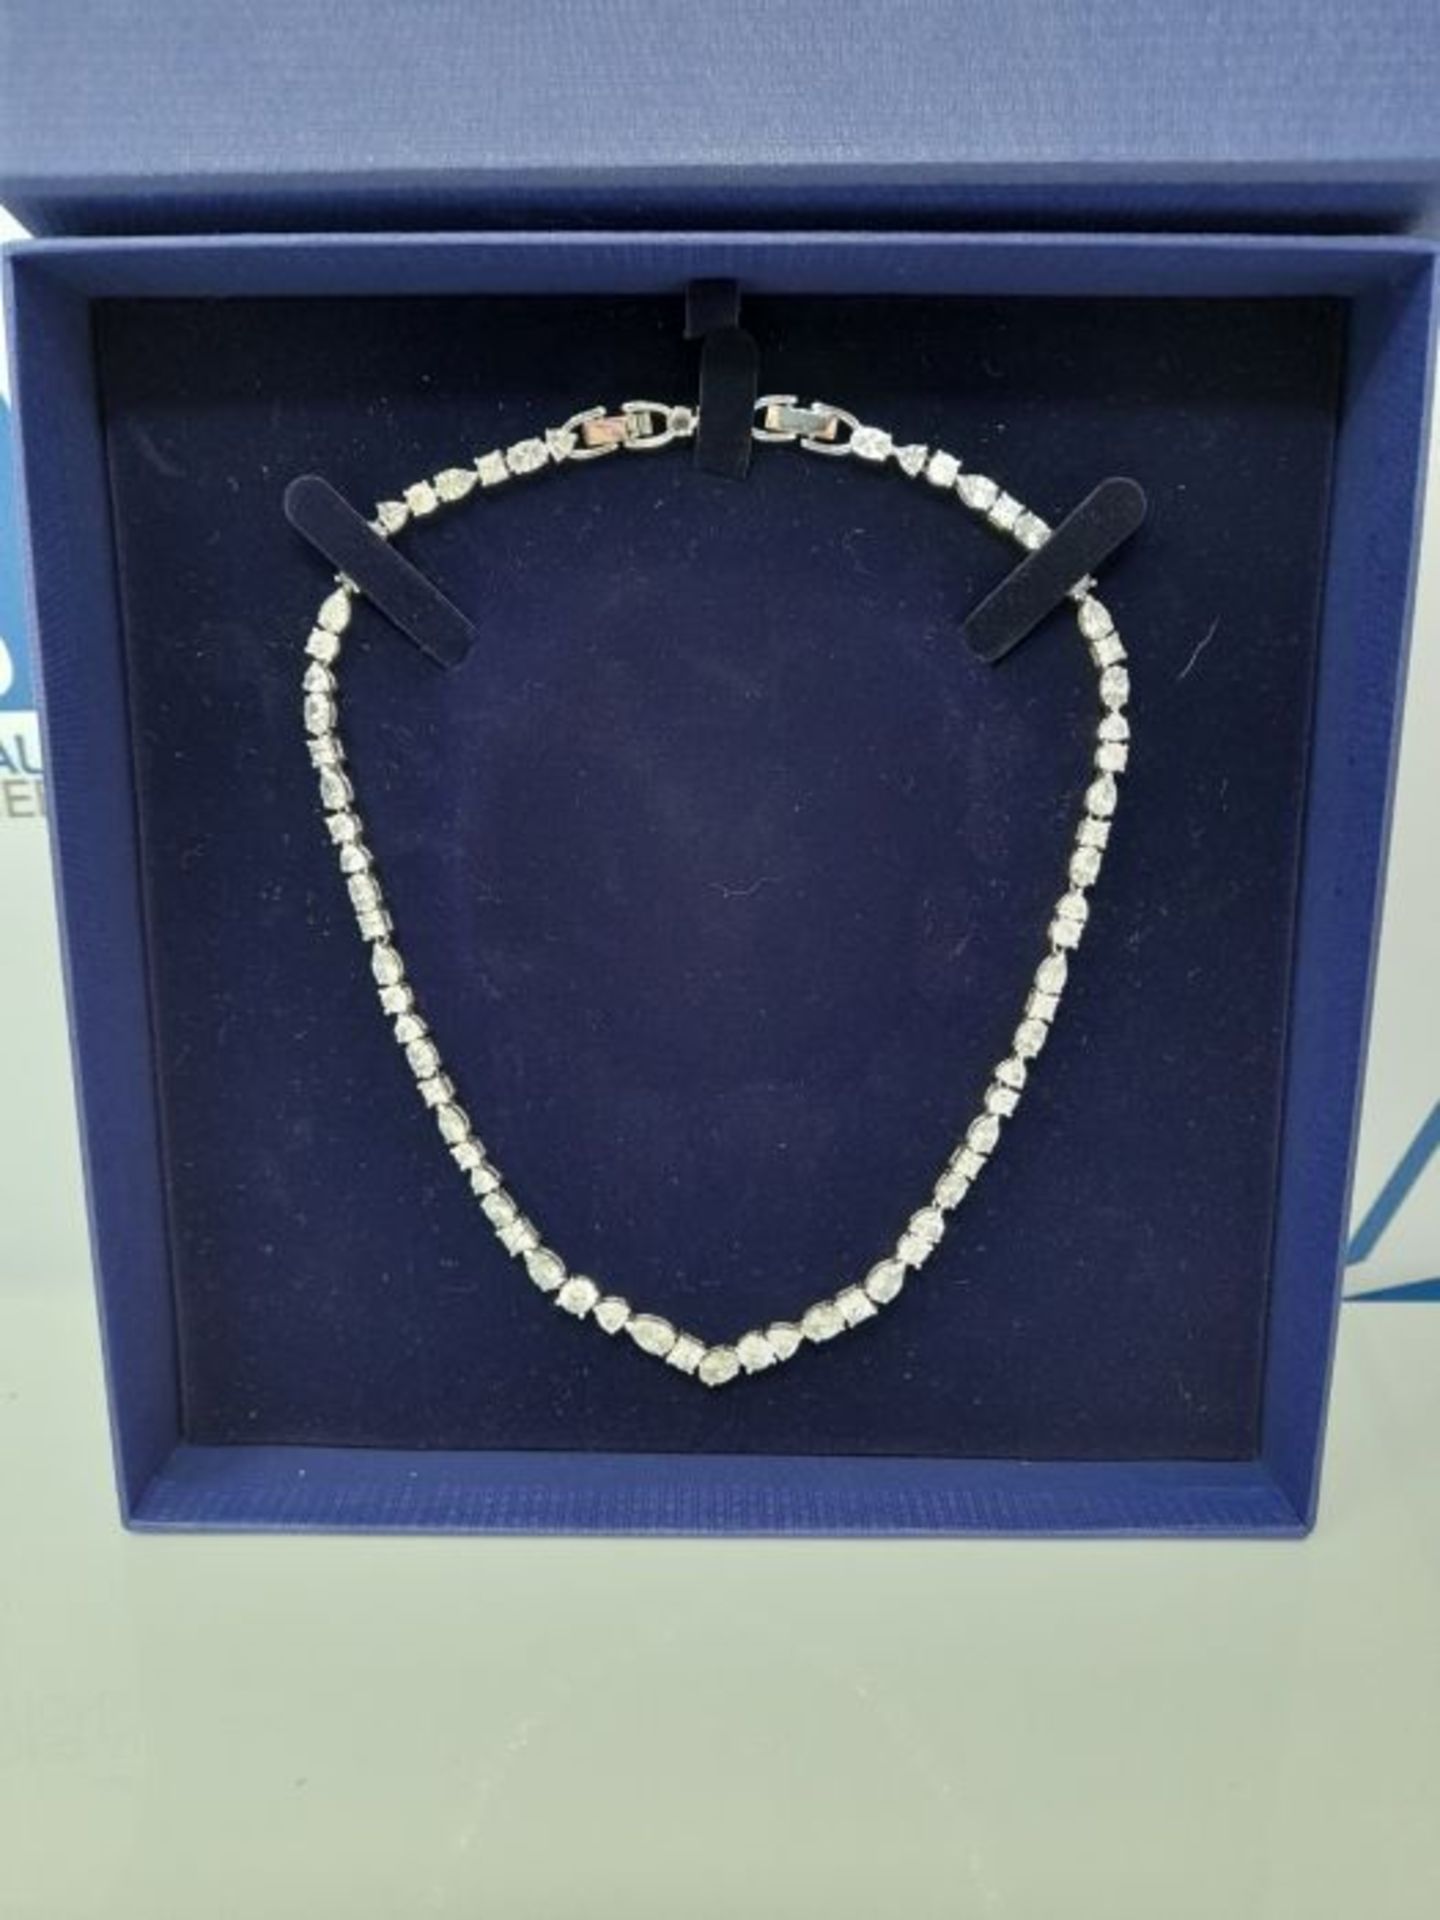 RRP £244.00 Swarovski Women's Tennis Deluxe Necklace Brilliant White Crystal Stones with Rhodium P - Image 3 of 3